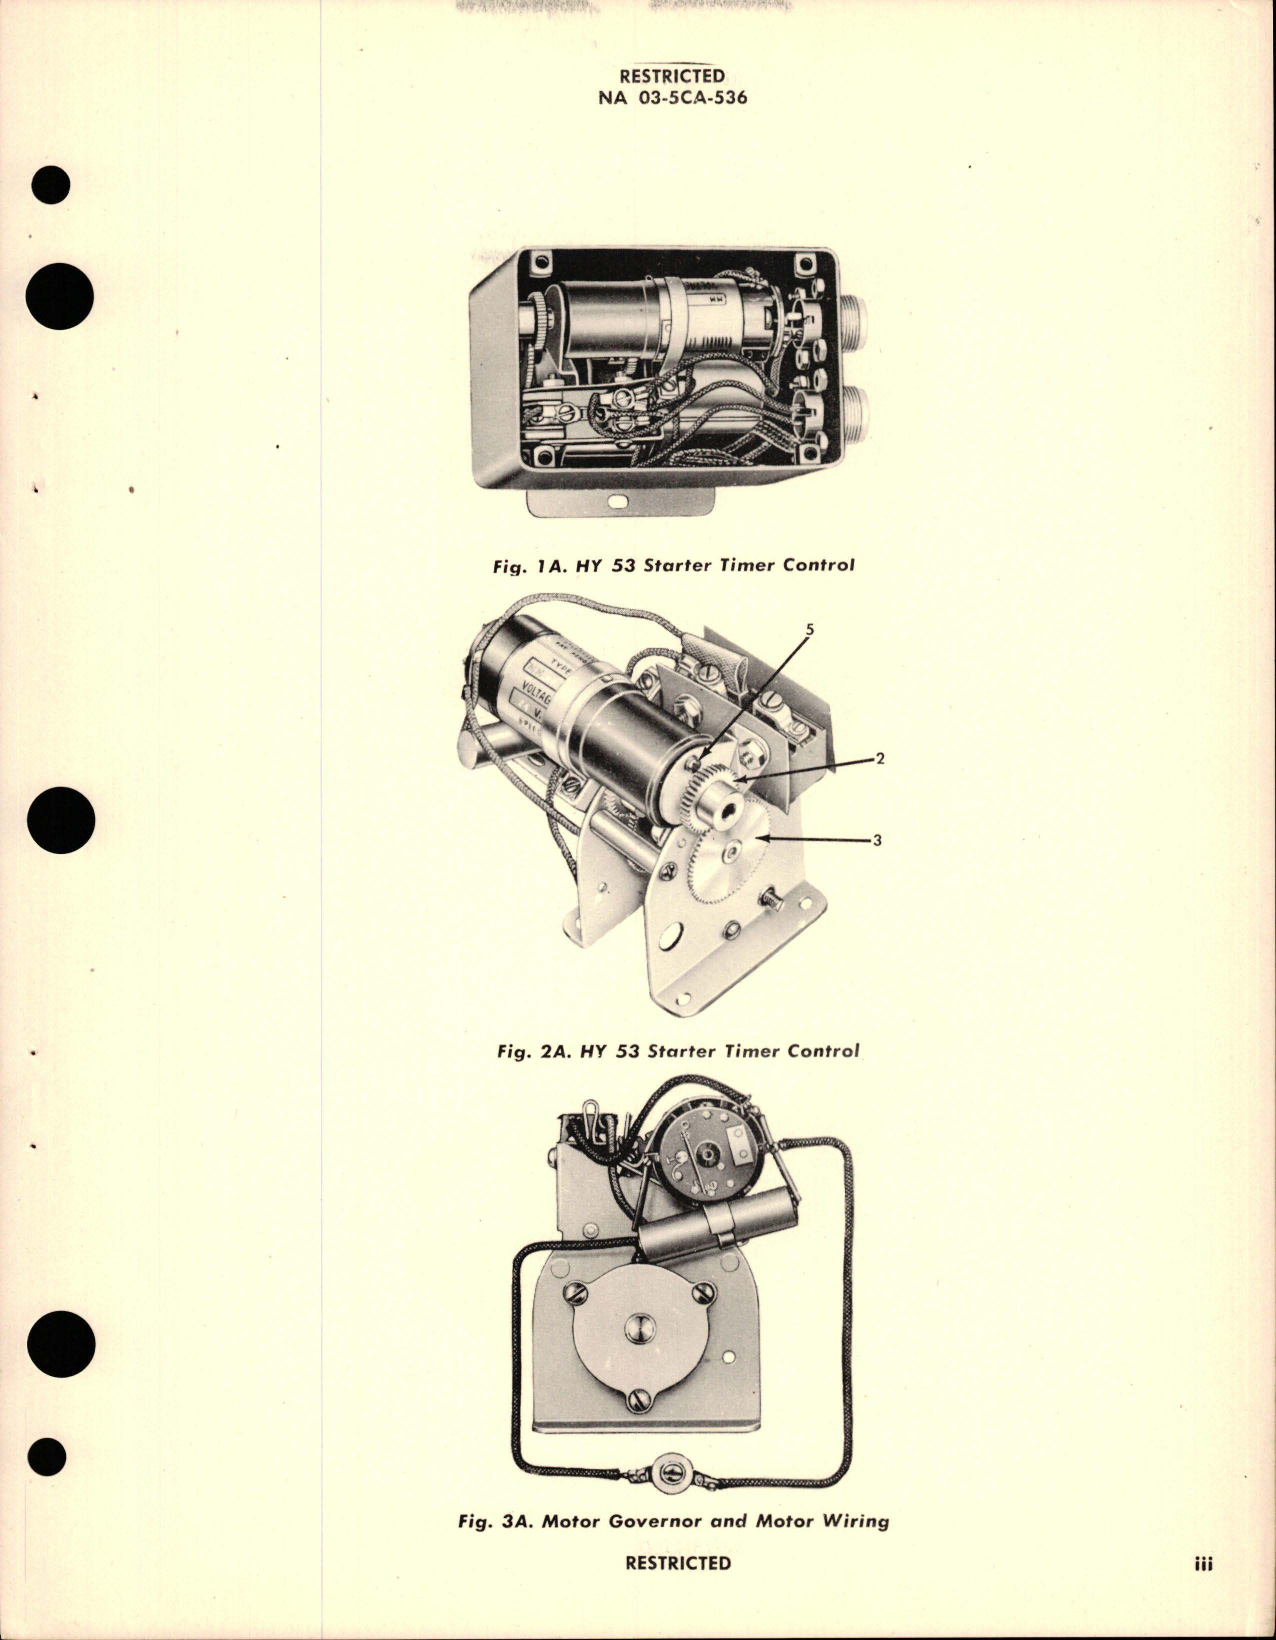 Sample page 5 from AirCorps Library document: Operation, Service, Overhaul Instructions with Parts Catalog for Starter Timer Control - Model HY-51